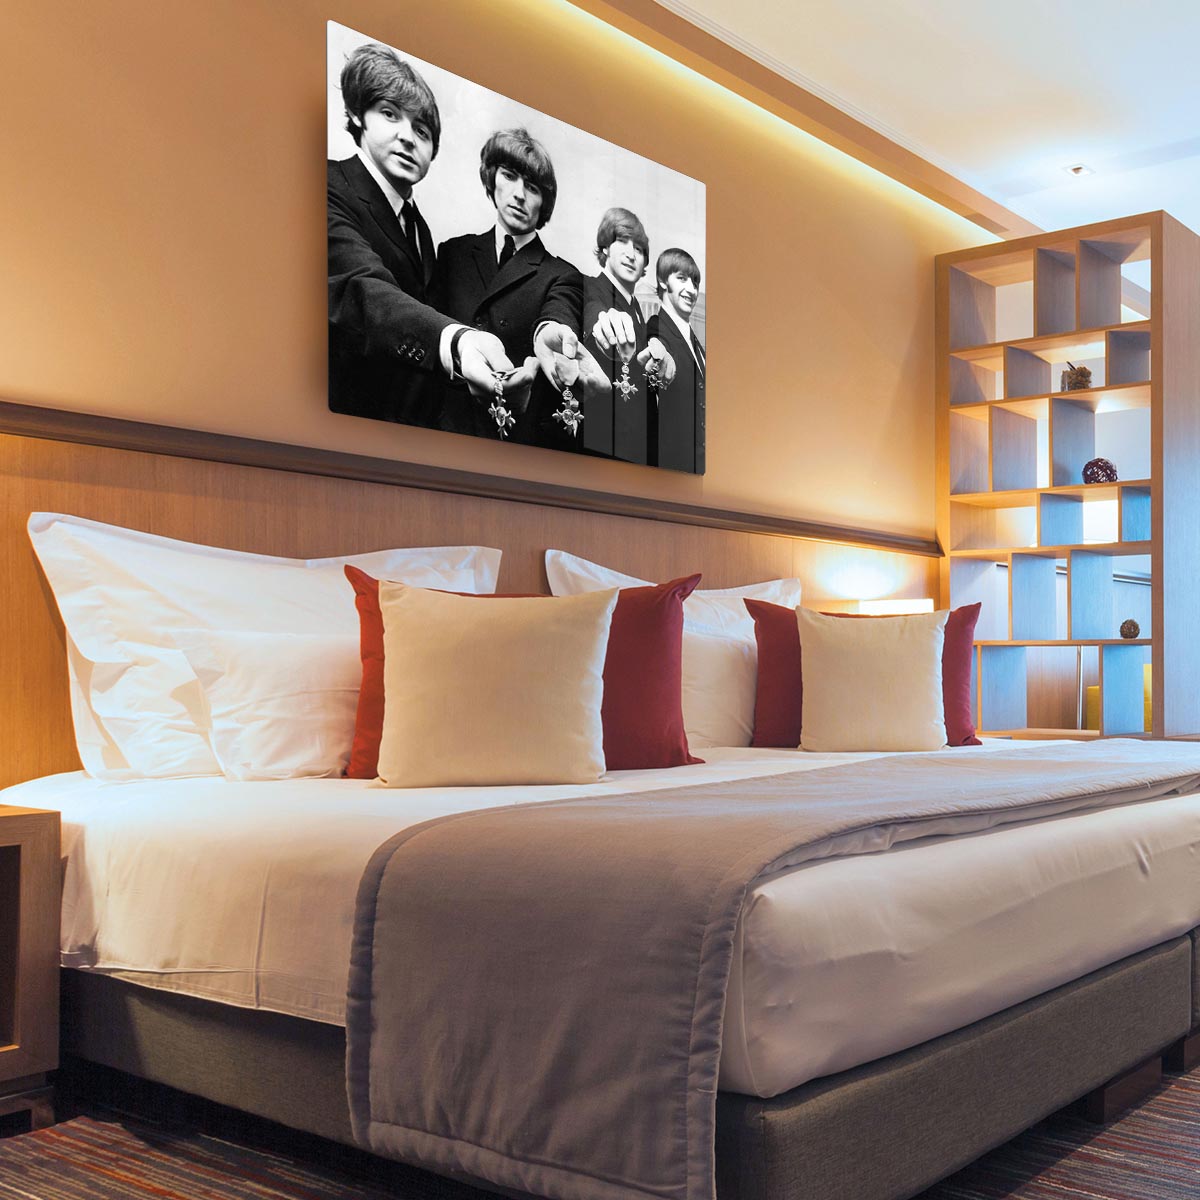 The Beatles with their MBEs HD Metal Print